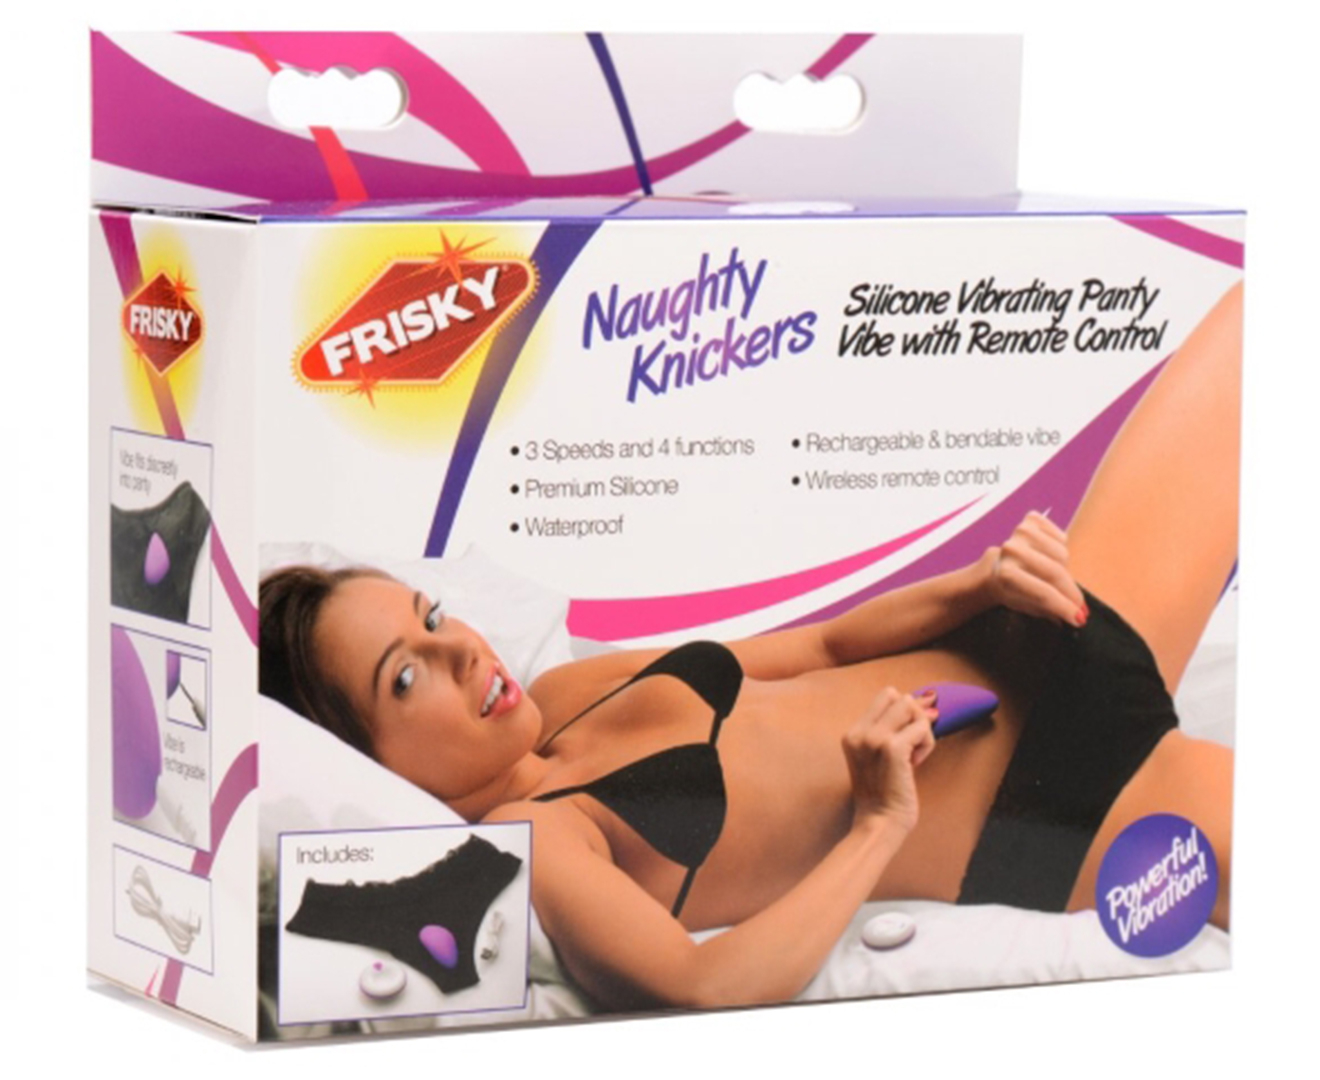 Frisky Naughty Knickers Silicone Vibrating Panty Vibe w/ Remote Control